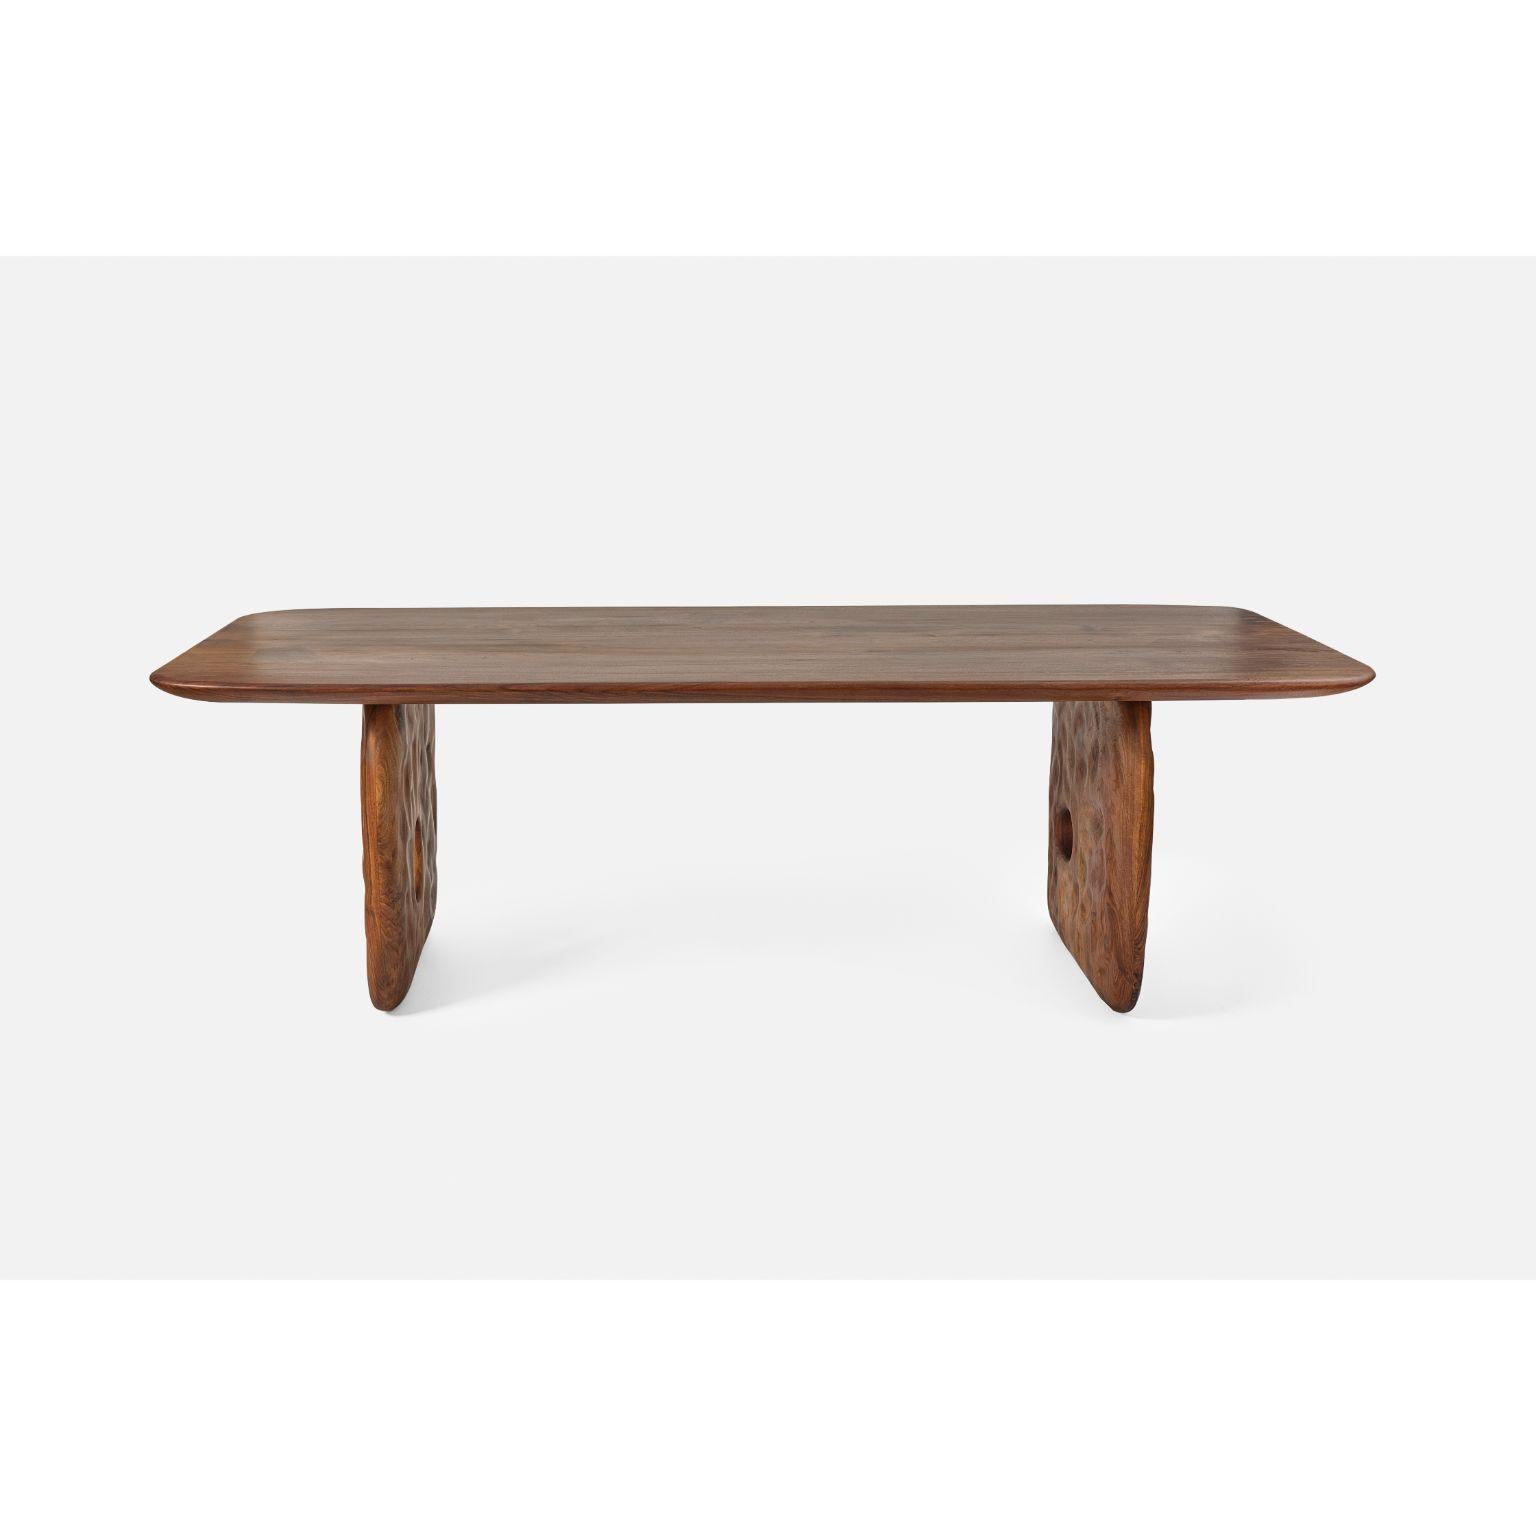 Kagrai Dining Table XL by Contemporary Ecowood
Dimensions: W 130 x D 400 x H 75 cm.
Materials: American Clora Walnut.
Color: Natural
3 Legs

Contemporary Ecowood’s story began in a craft workshop in 2009. Our wood passion made us focus on fallen